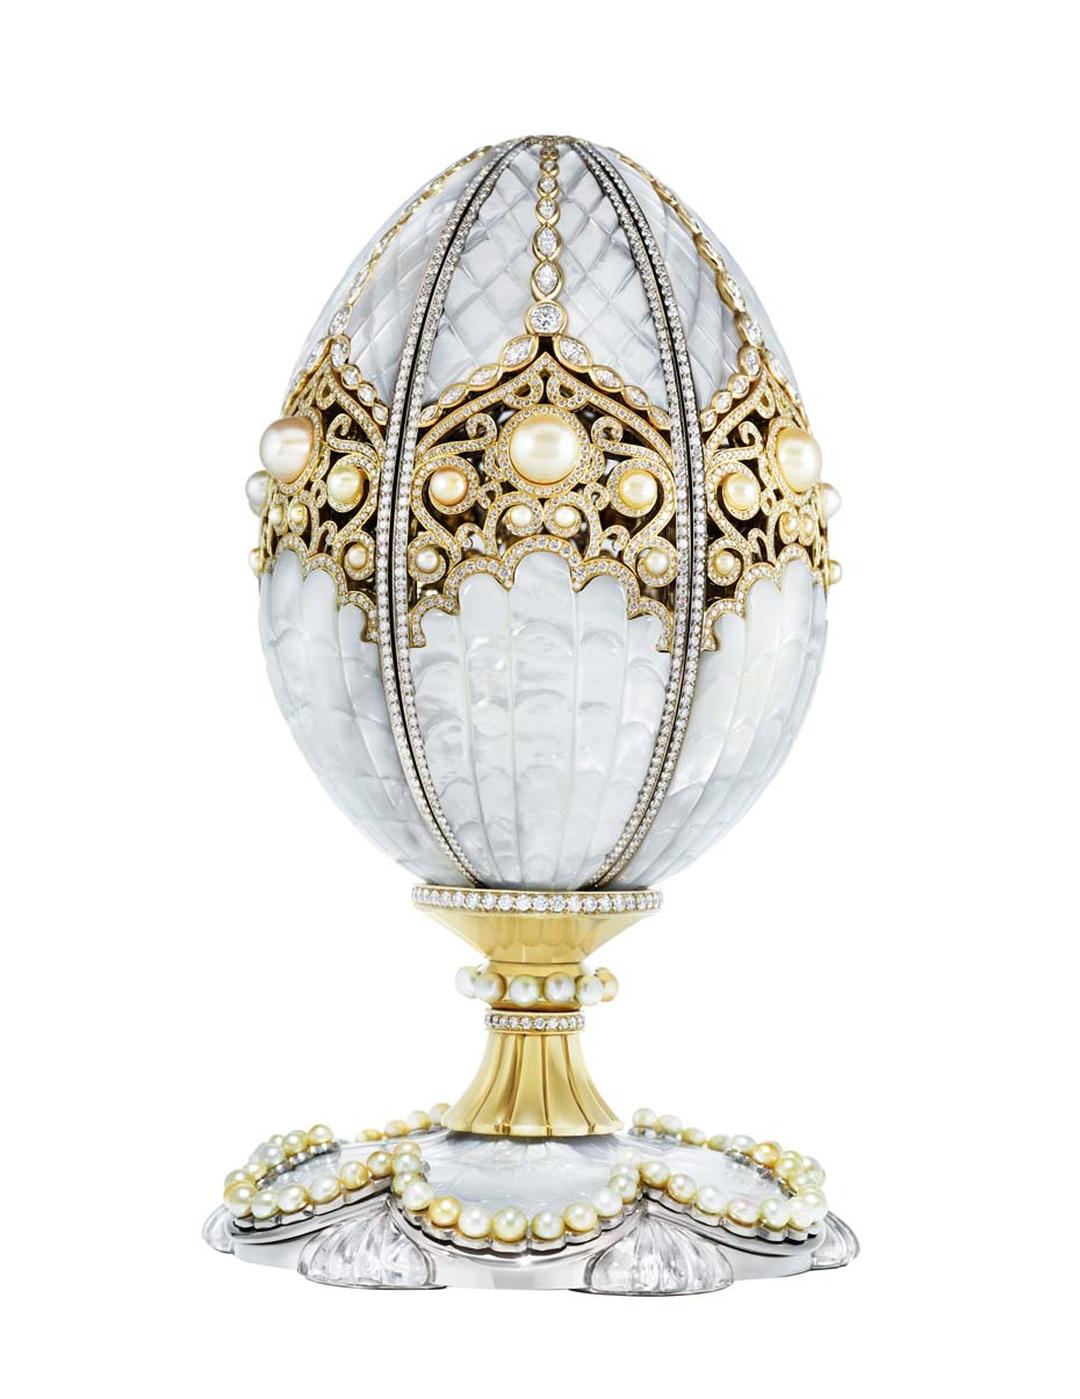 The first Imperial Fabergé Egg created in almost a century is unveiled